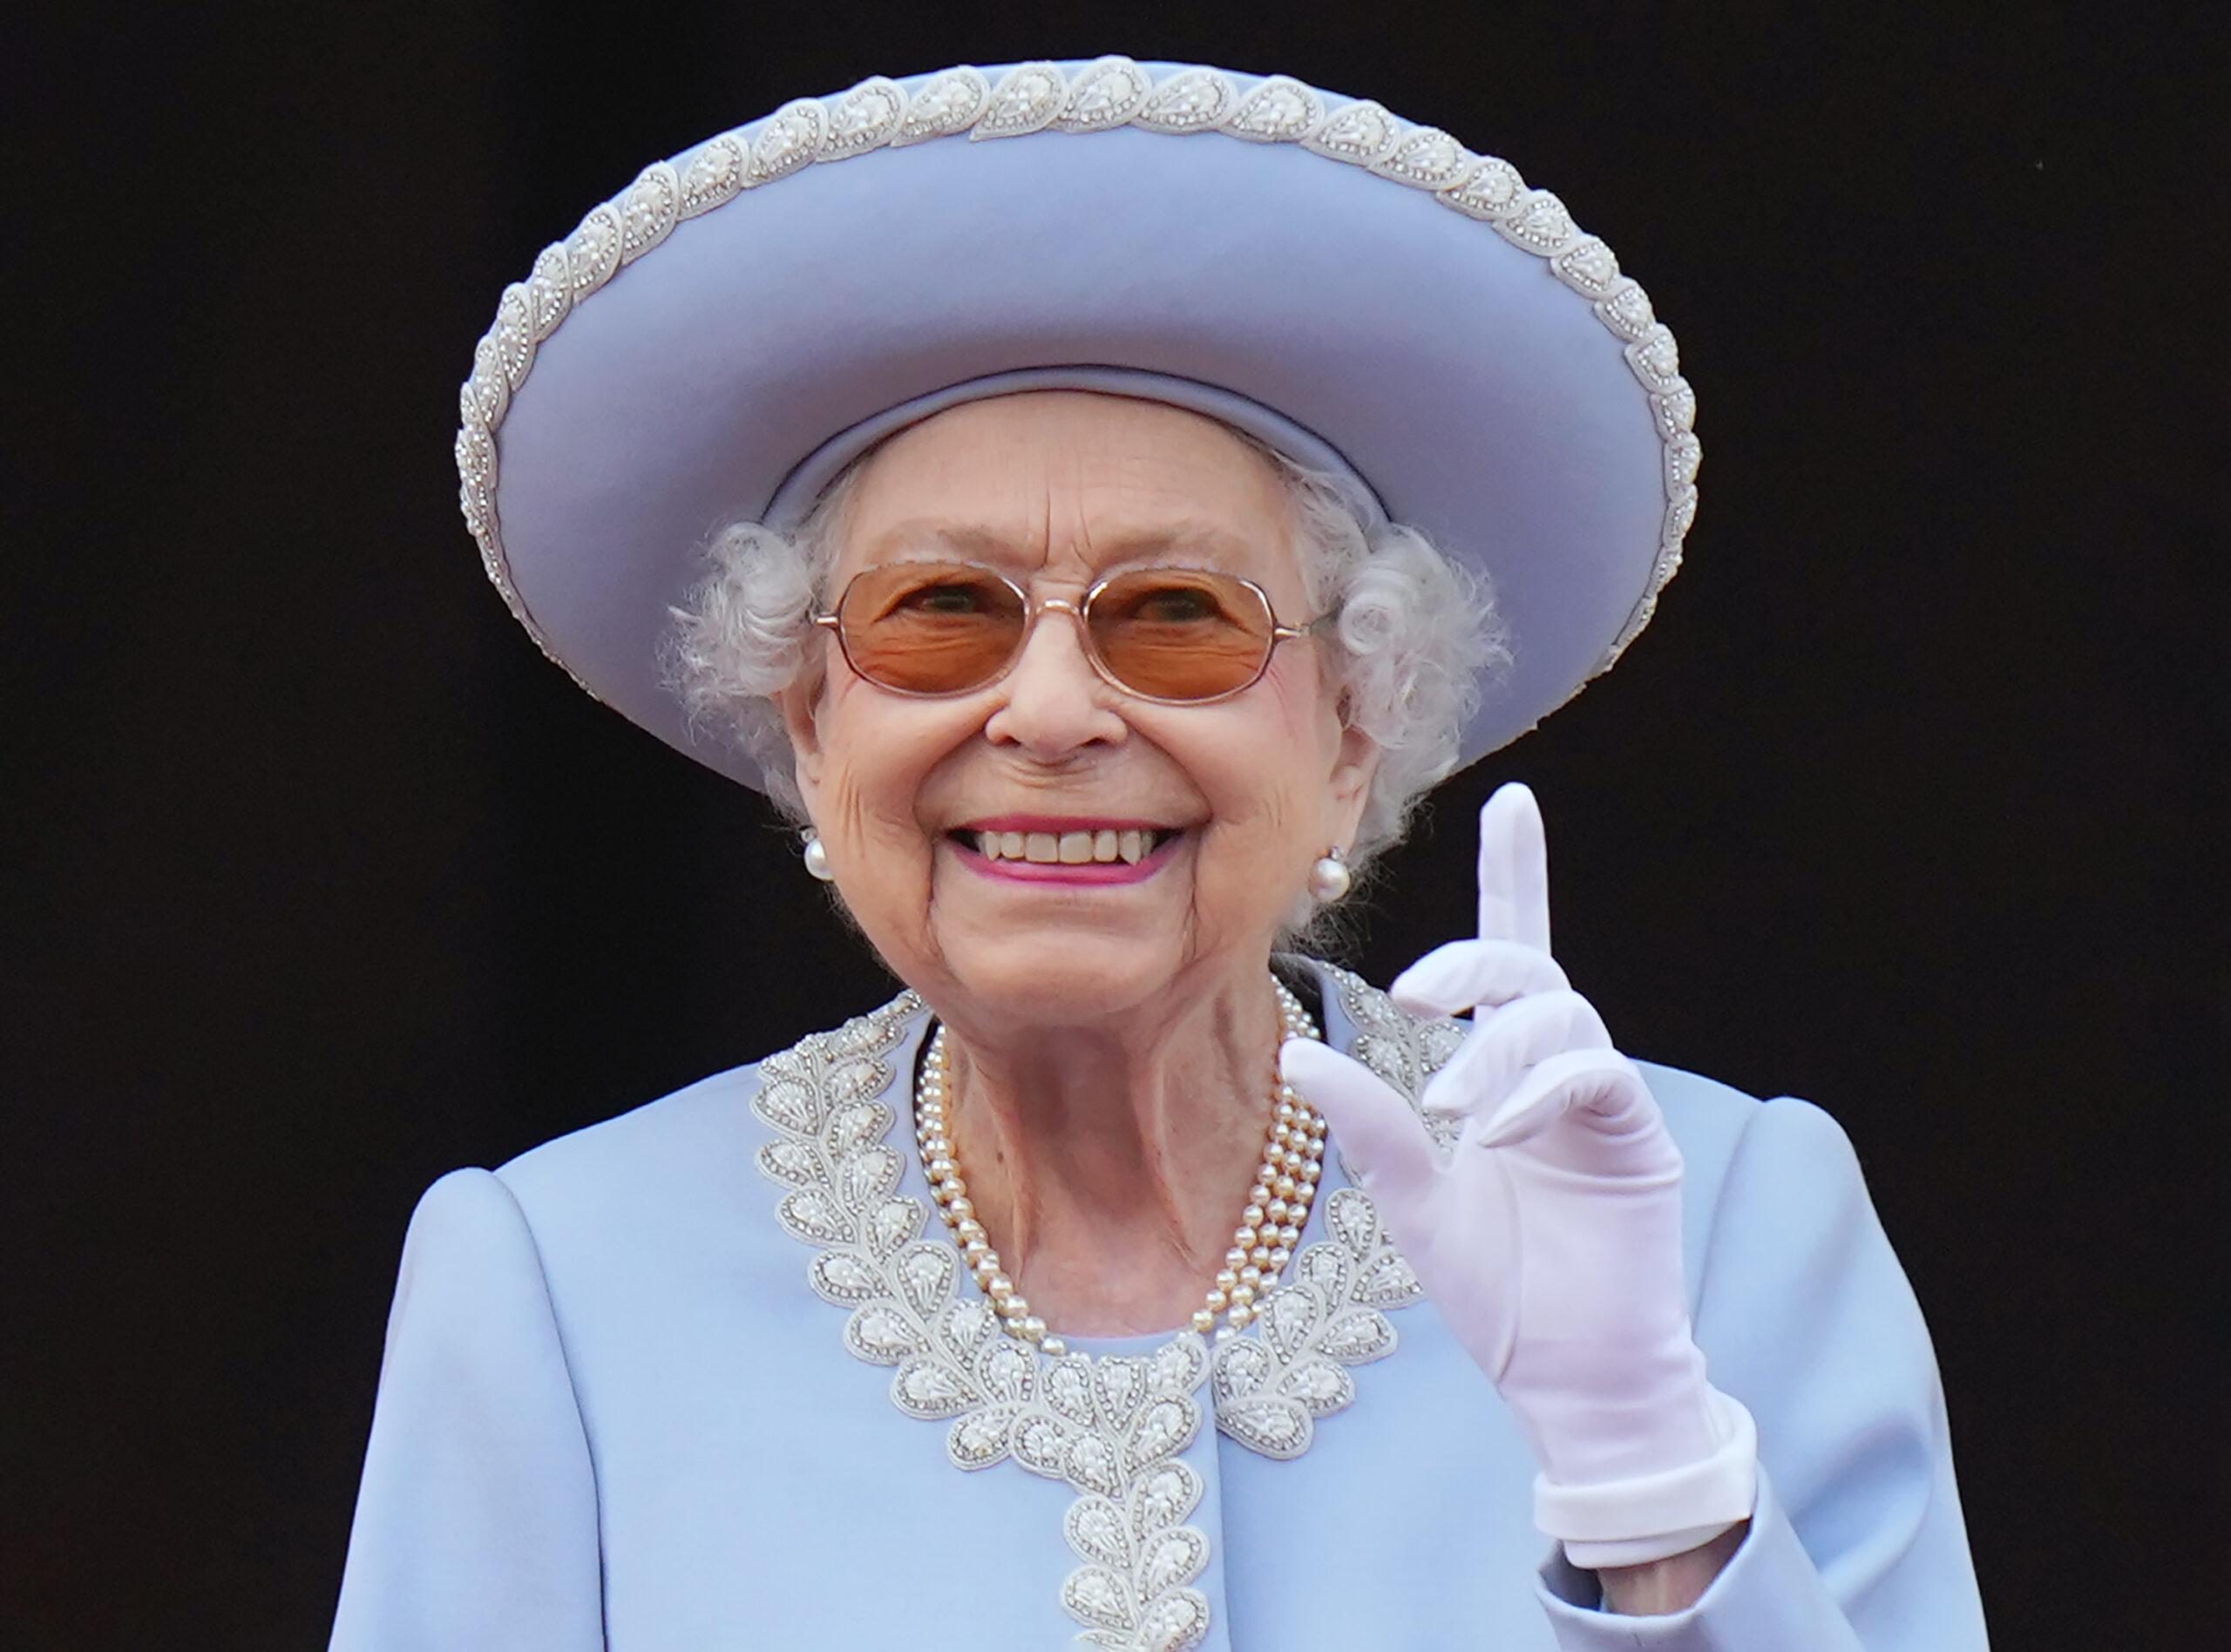 The Queen missed the first day of the Royal Ascot races